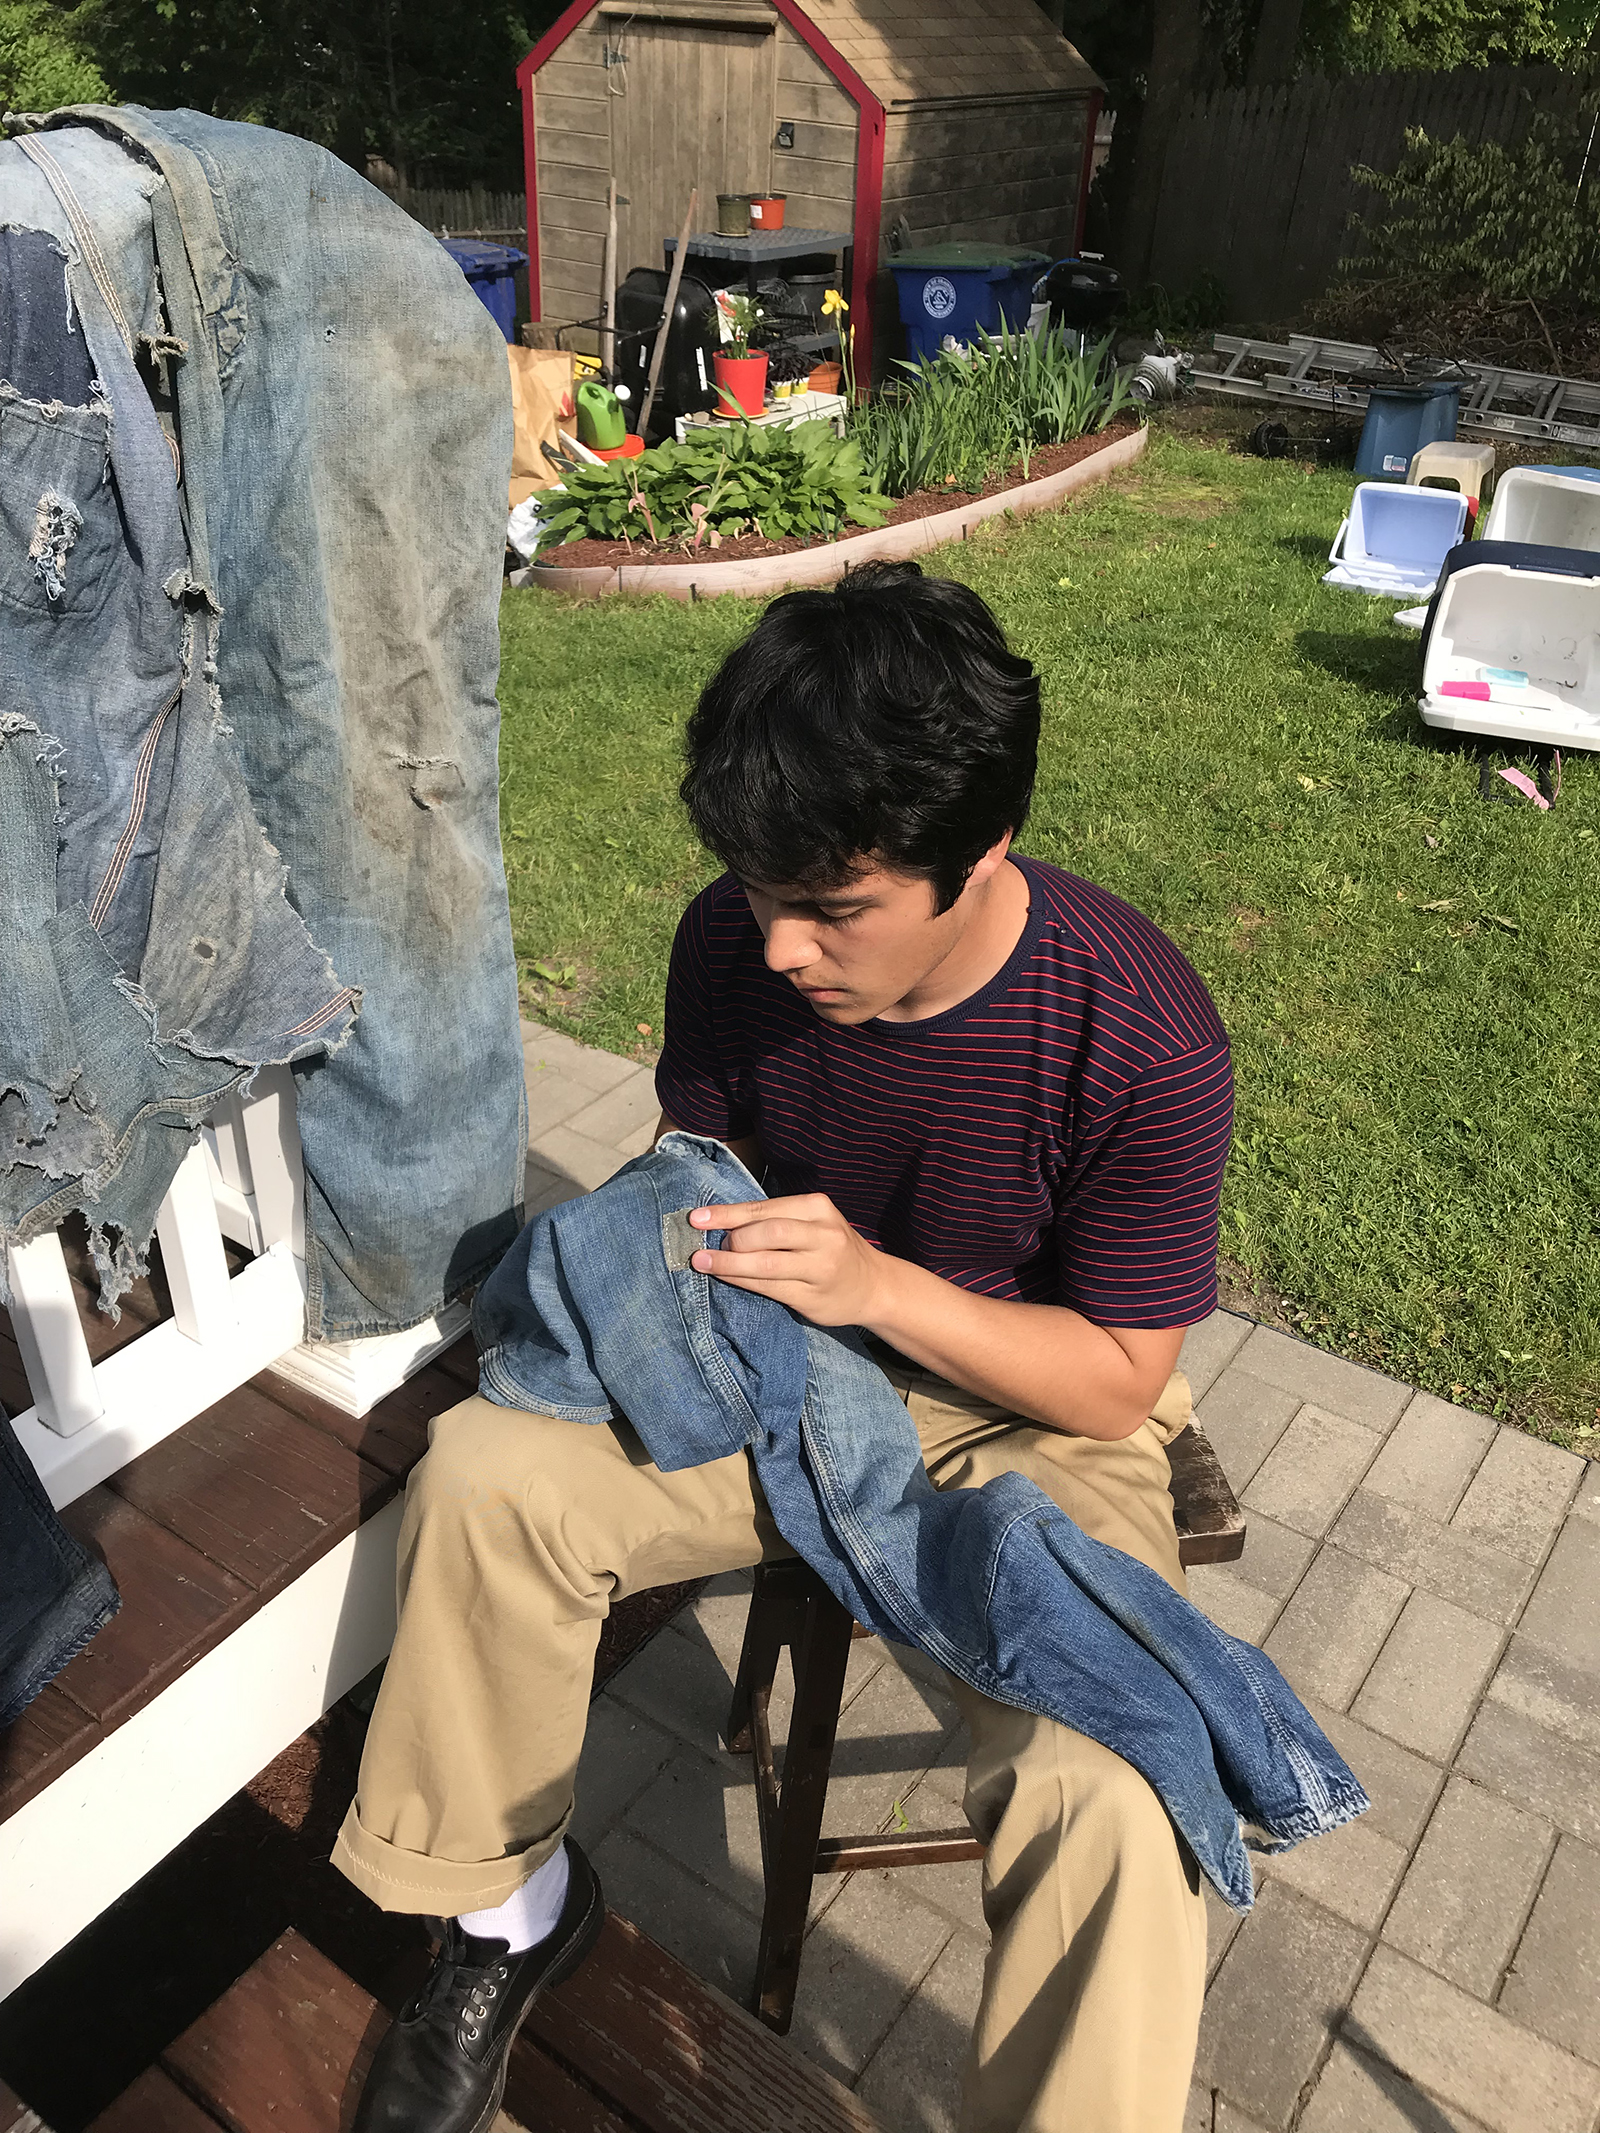 Ben Keefe sits down as he repairs jeans